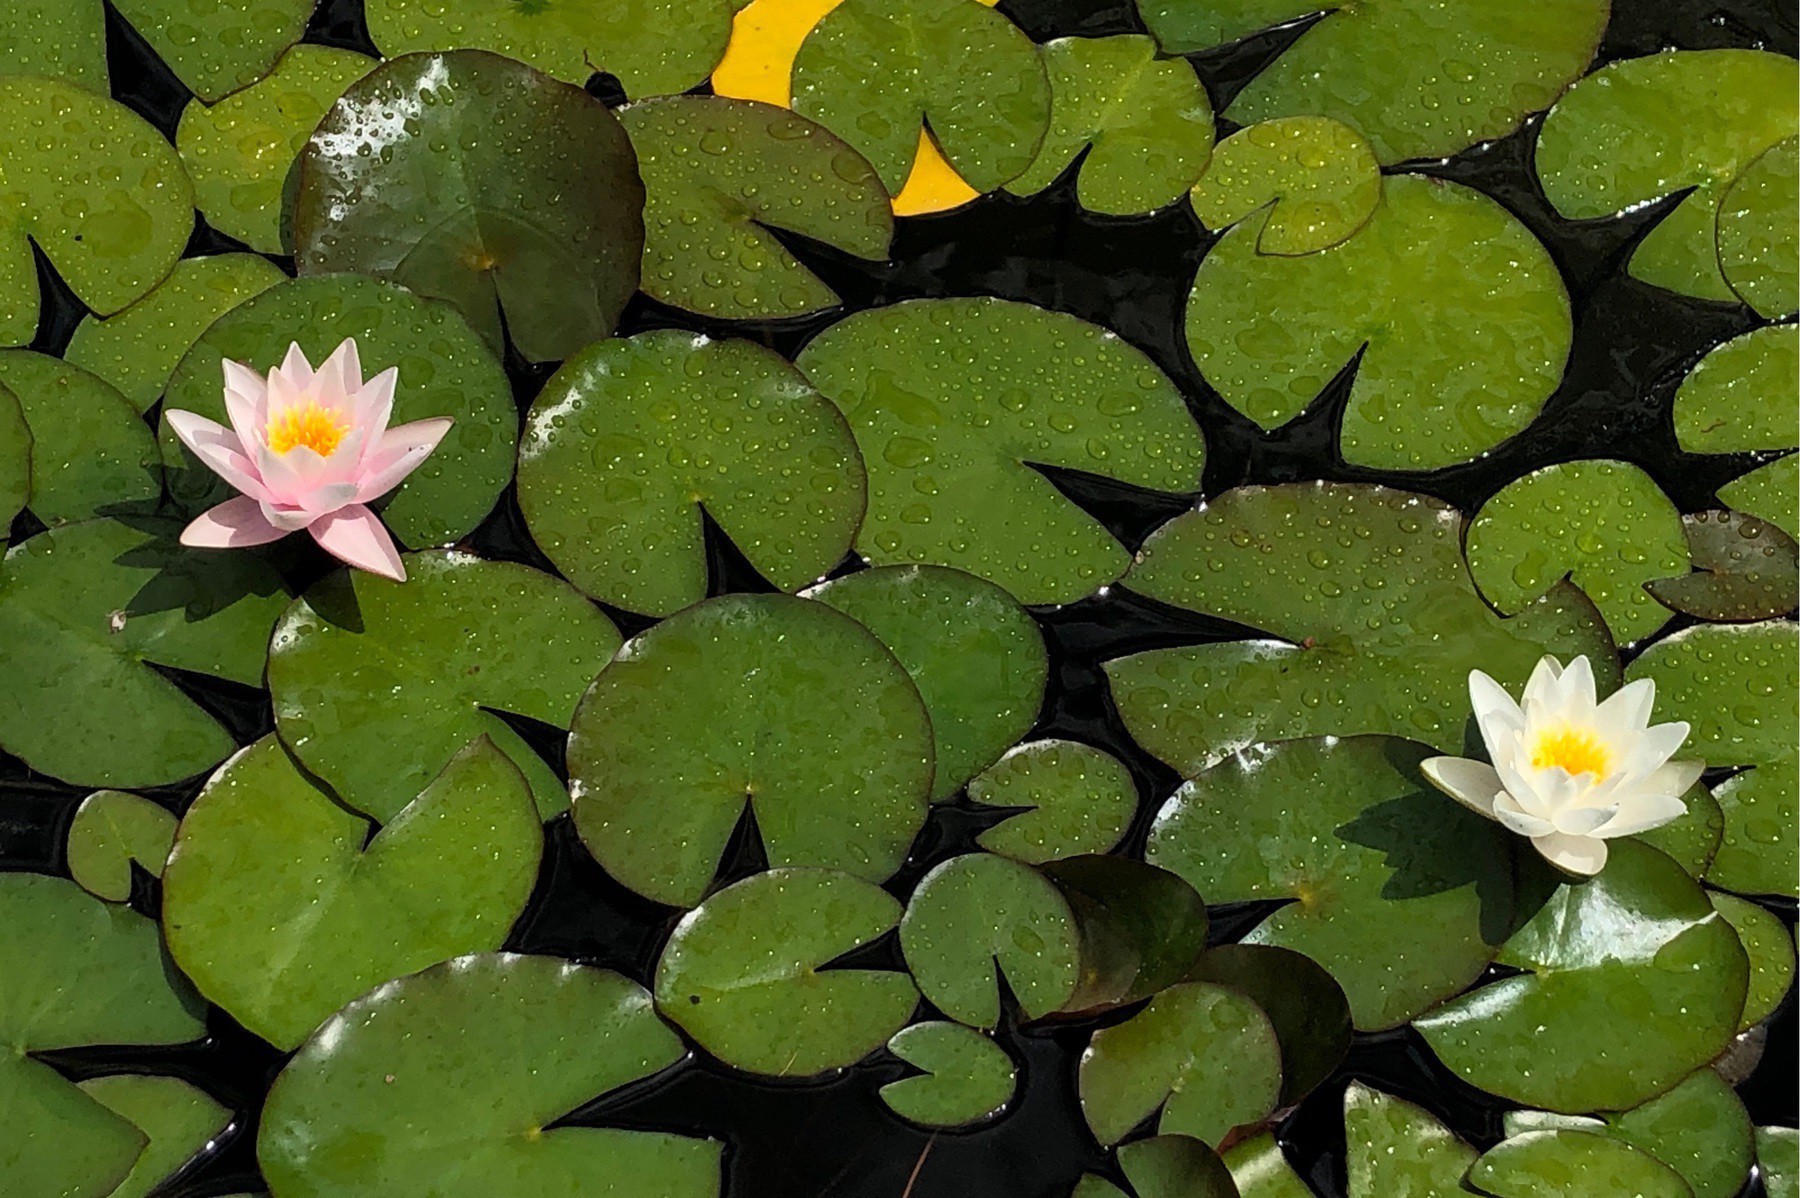 Lotus flowers and lily pads.